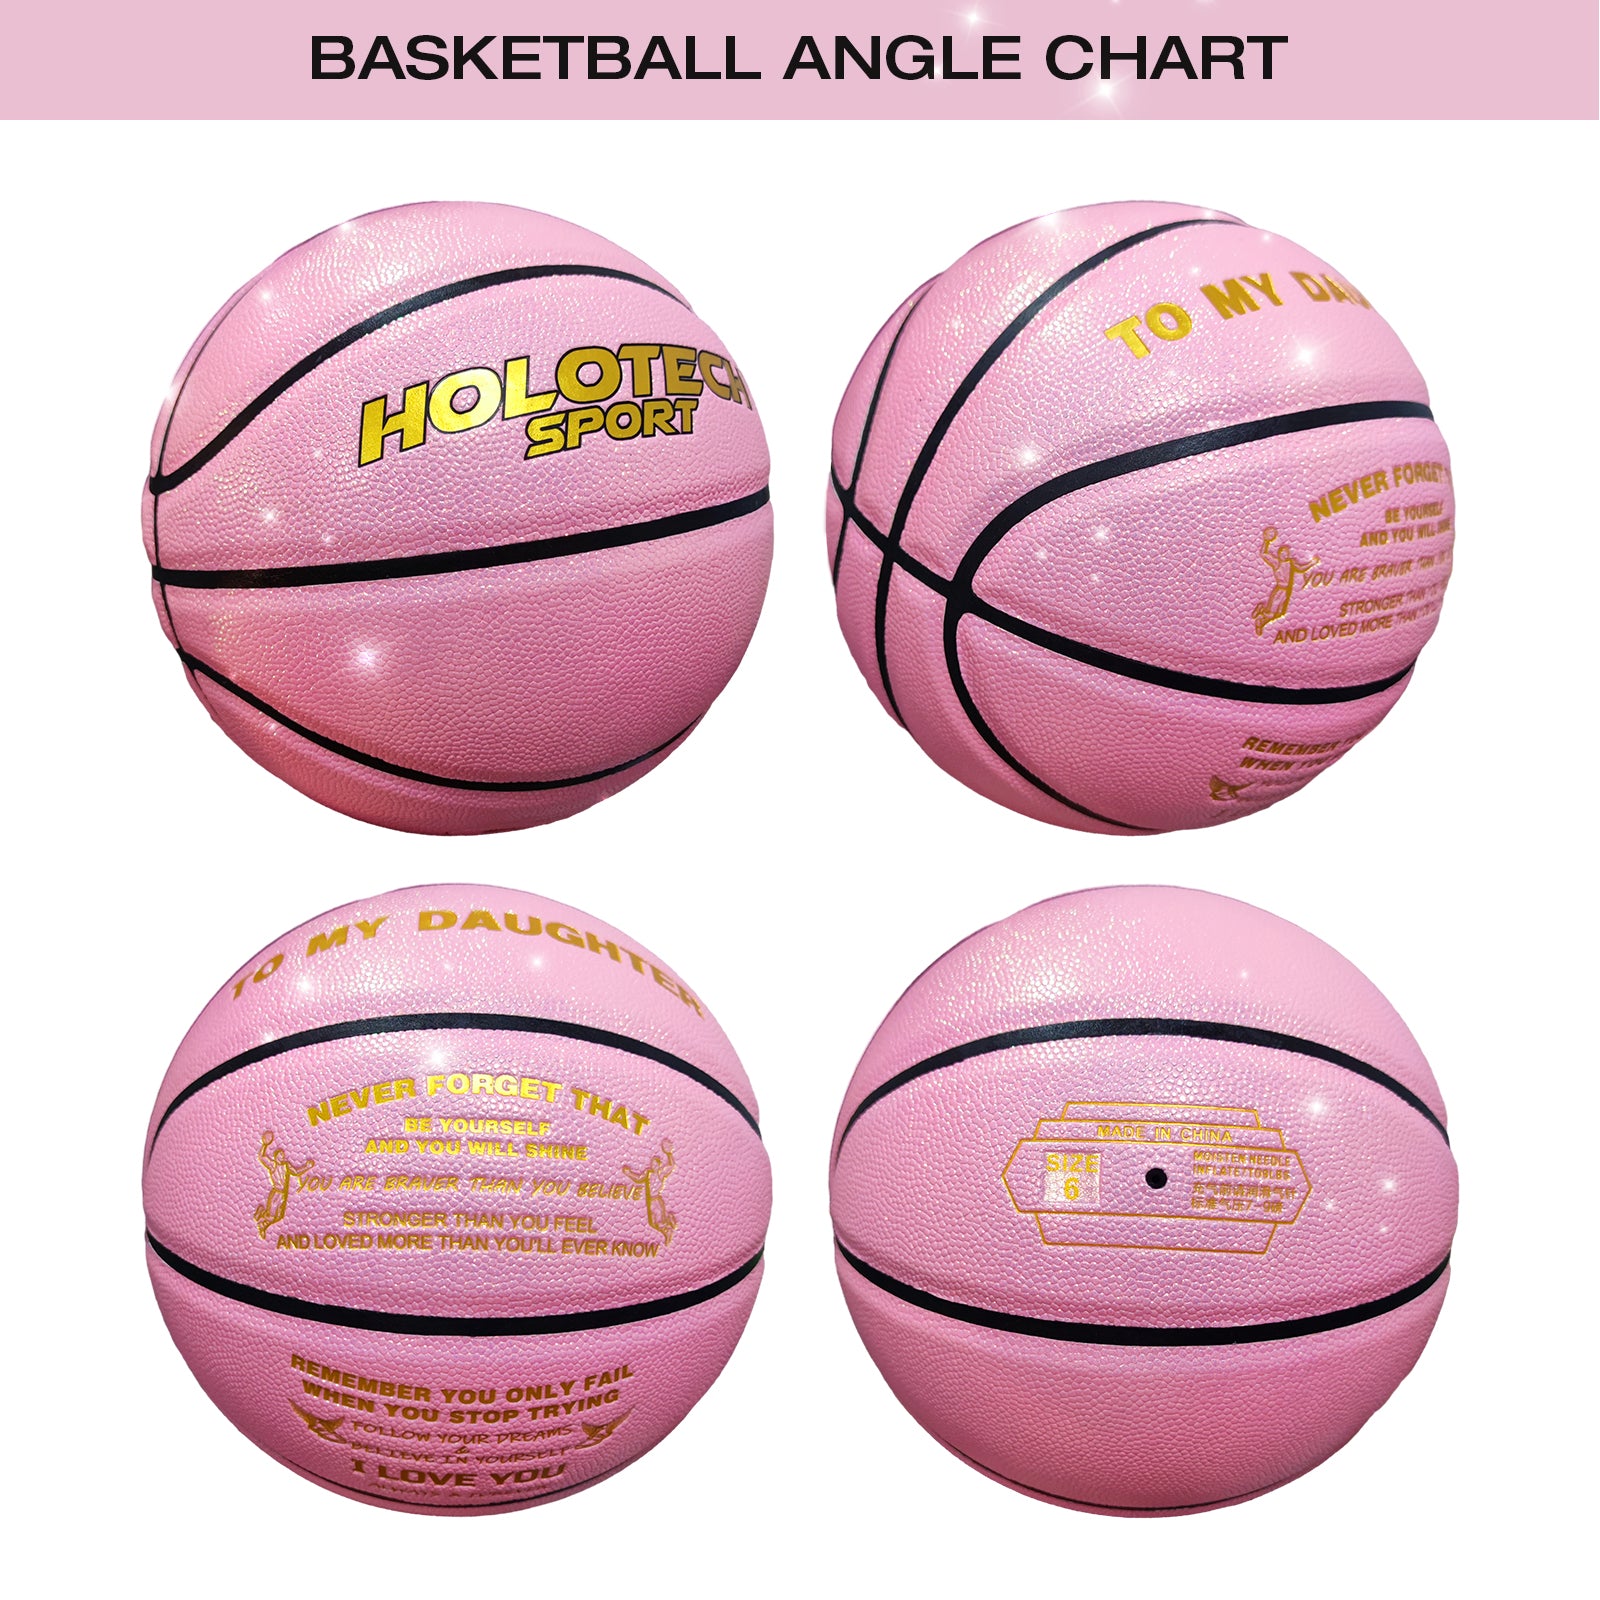 Personalized Basketball, Sparkle Glow to My Daughter Basketball Gift, Cool Indoor Outdoor Glitter Shiny Leather Basketball Size 6 for Youth, Girls, Women (with Pump)